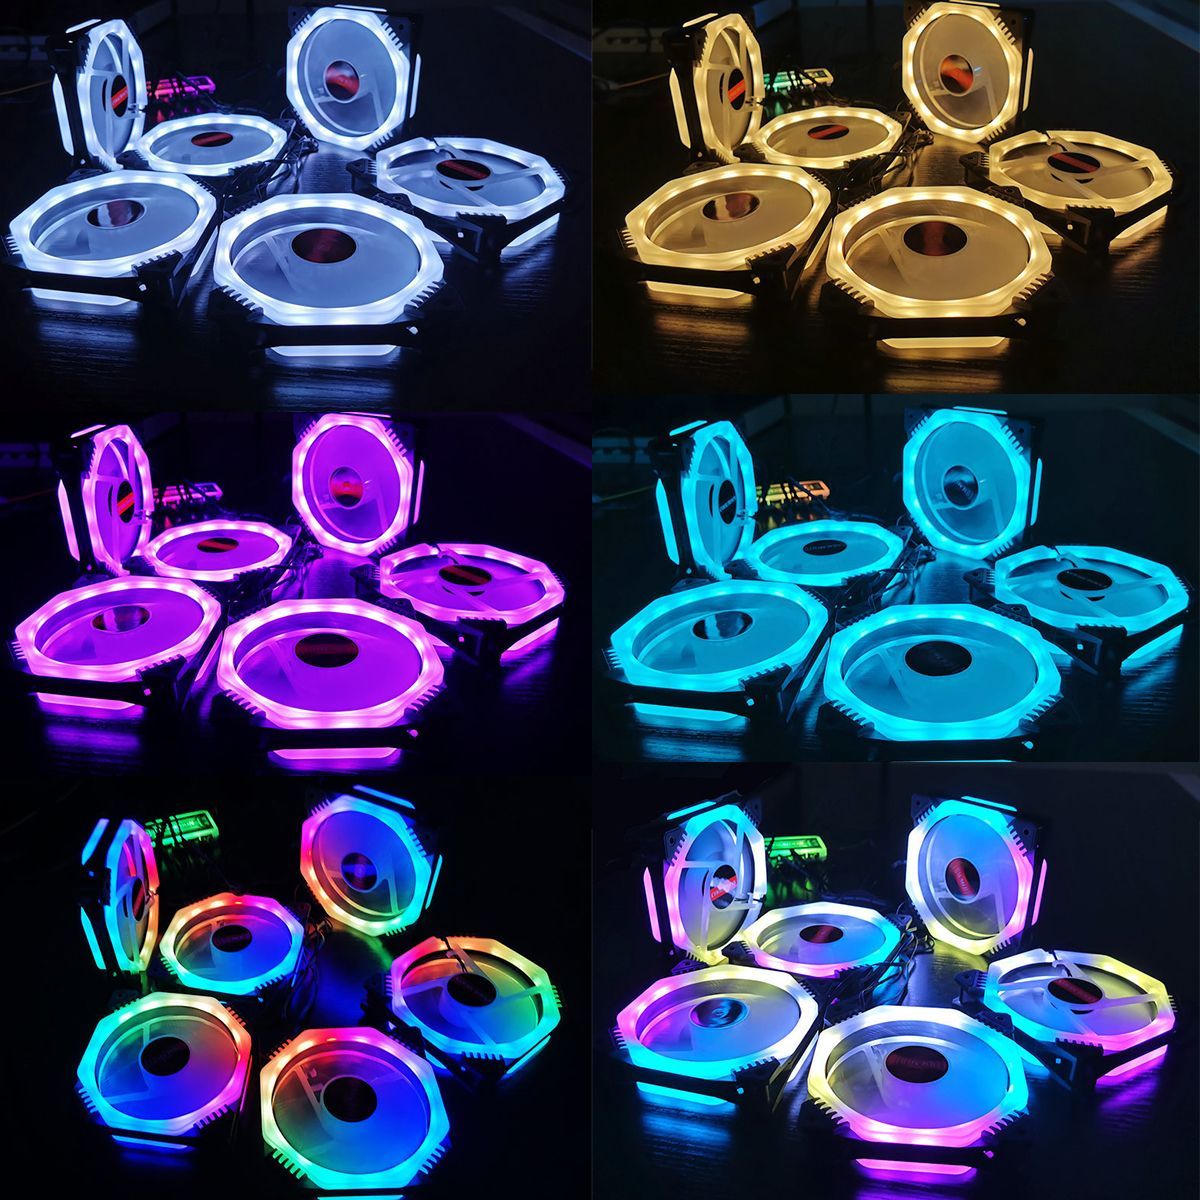 Coolmoon--6PCS-5V-3Pin-Adjustable-RGB-LED-Light-Computer-Case-PC-Cooling-Fan-with-Remote-1549662